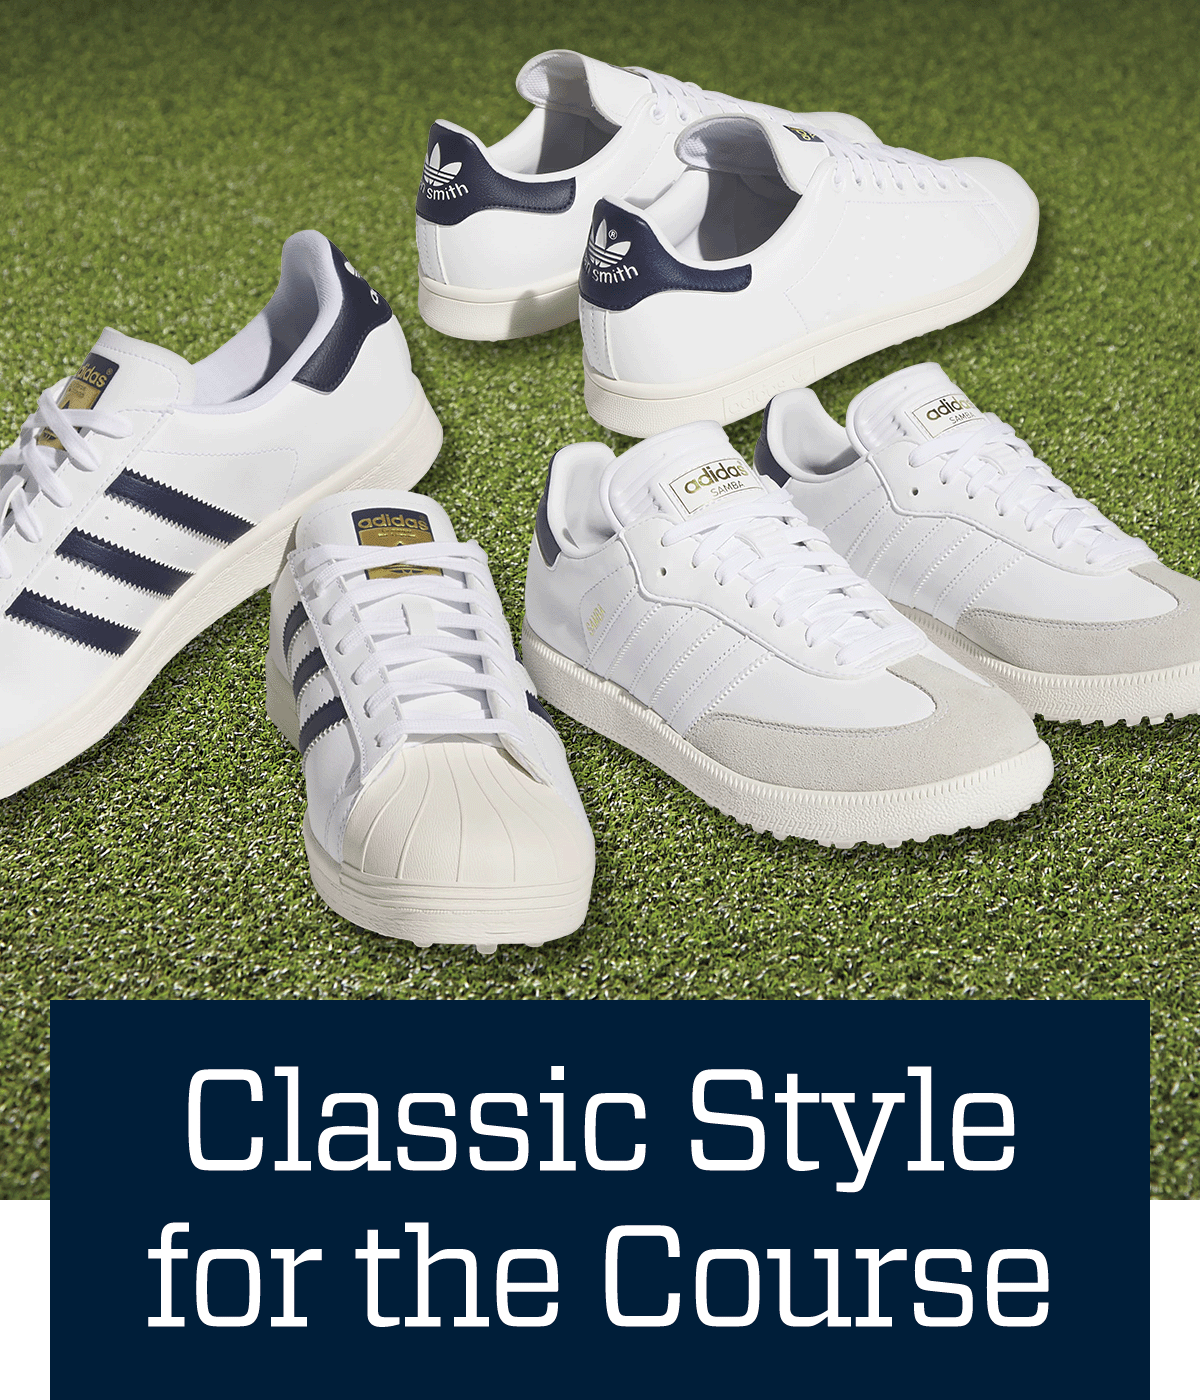  Classic style for the course.